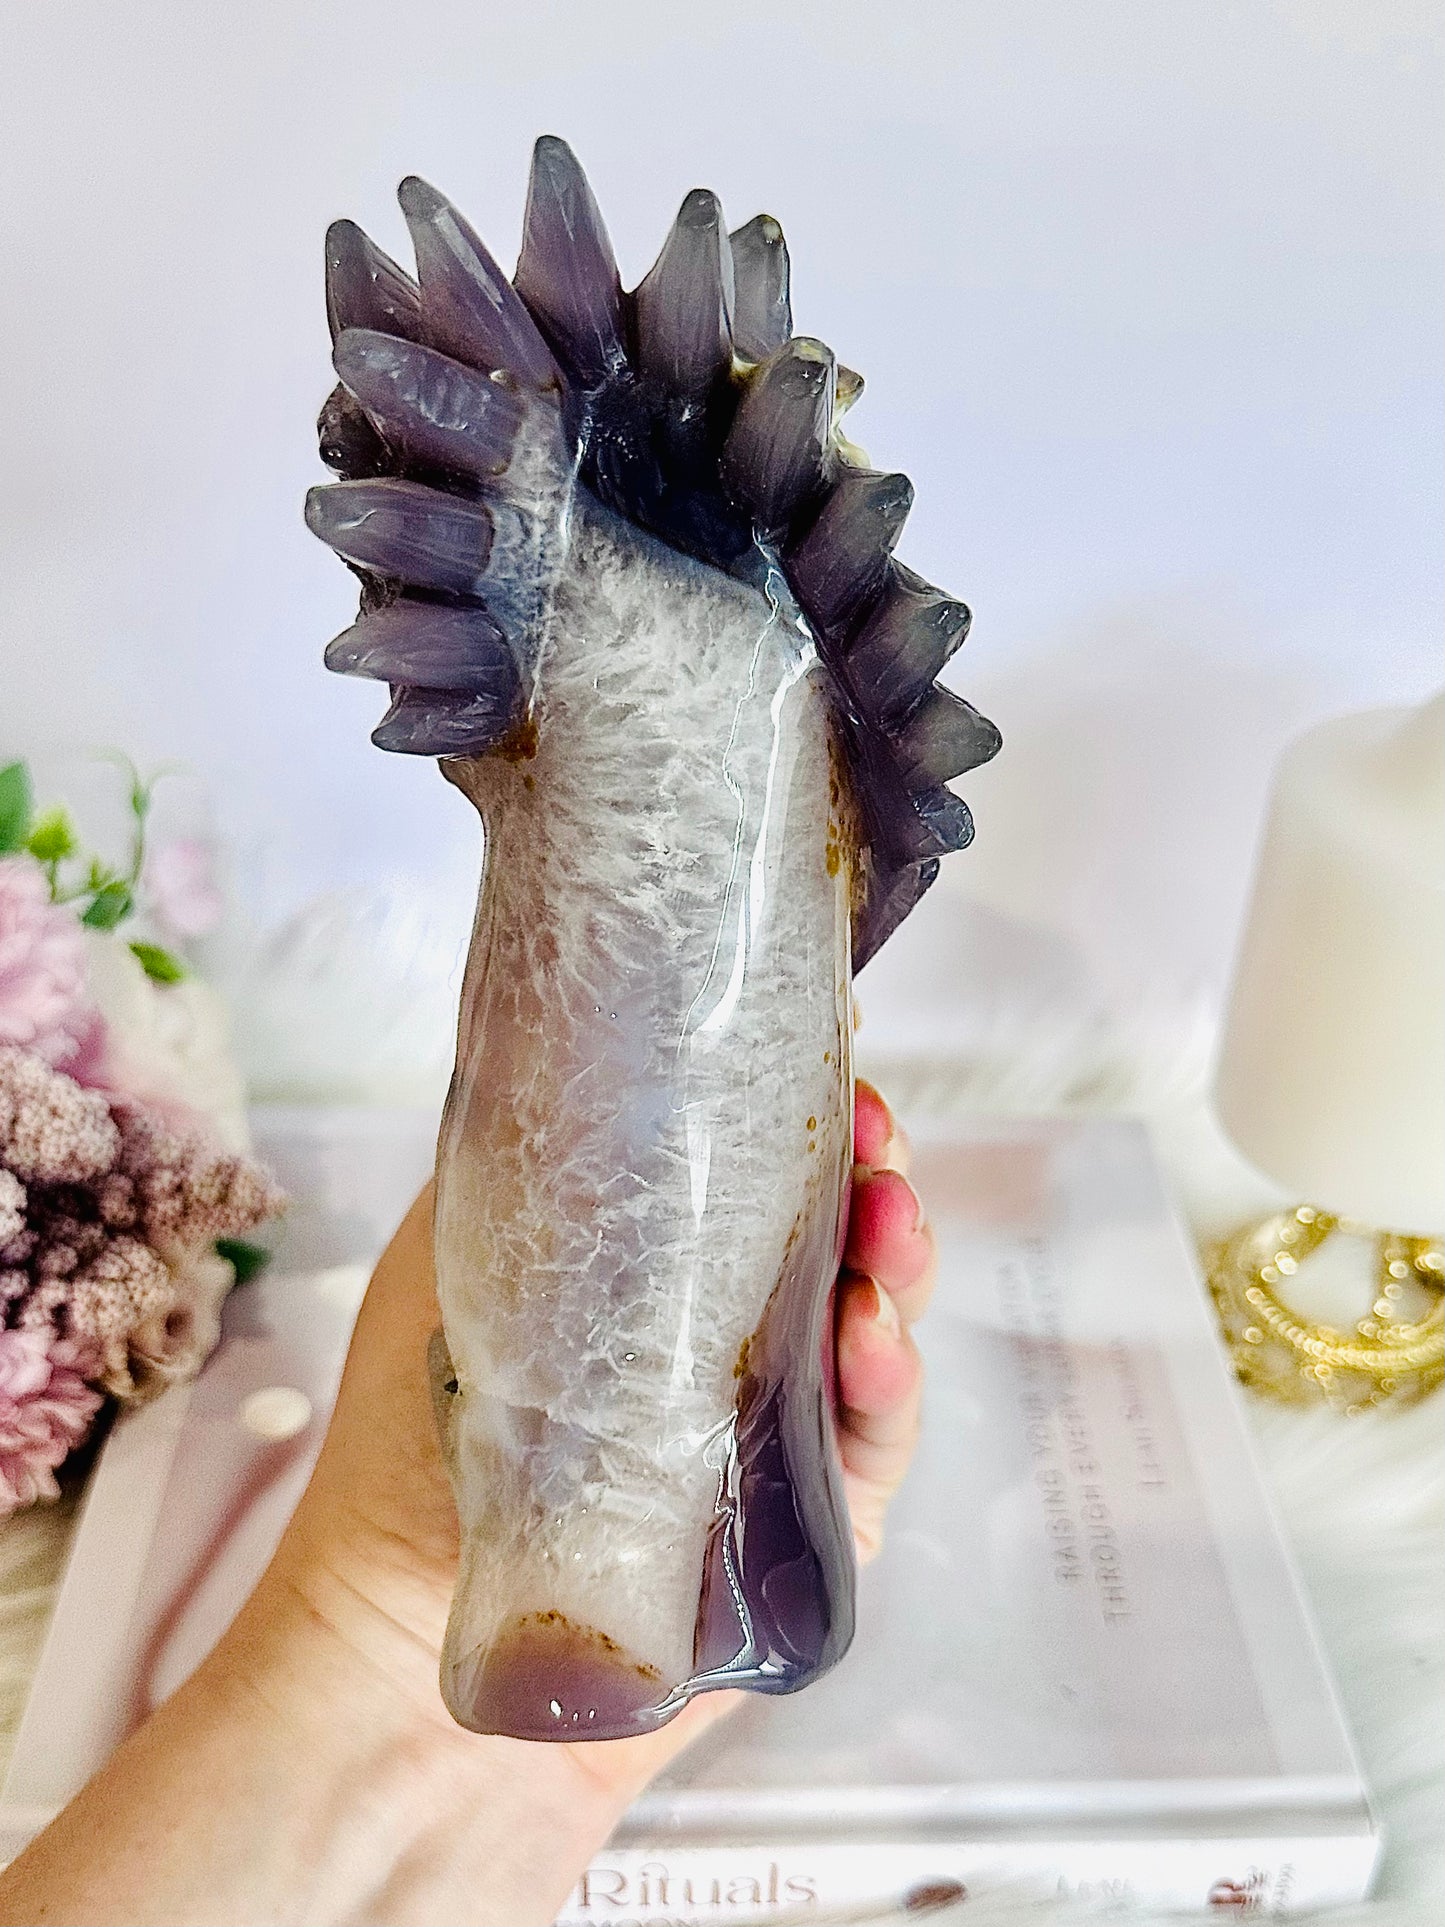 MASTERPIECE ALERT ~ Huge 1.3KG Druzy Agate Carved Wolf 17cm Tall & Absolutely Spectacular